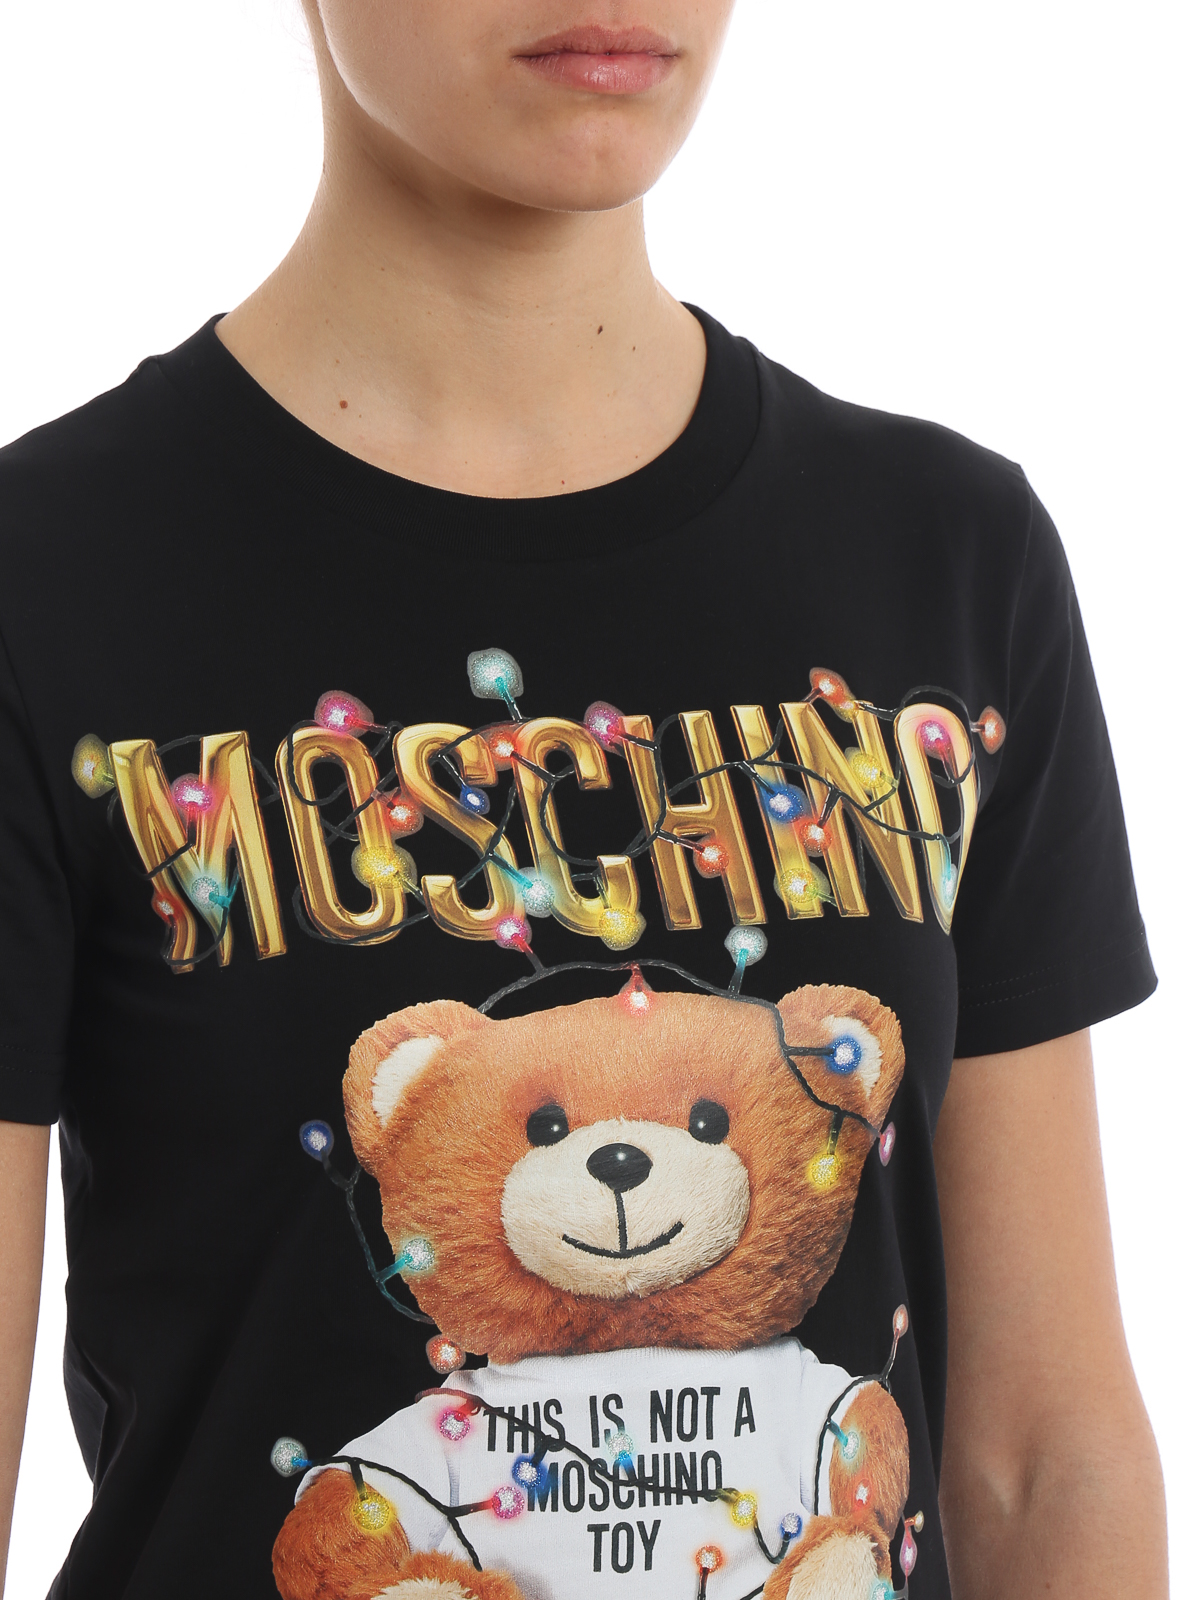 moschino not a toy t shirt